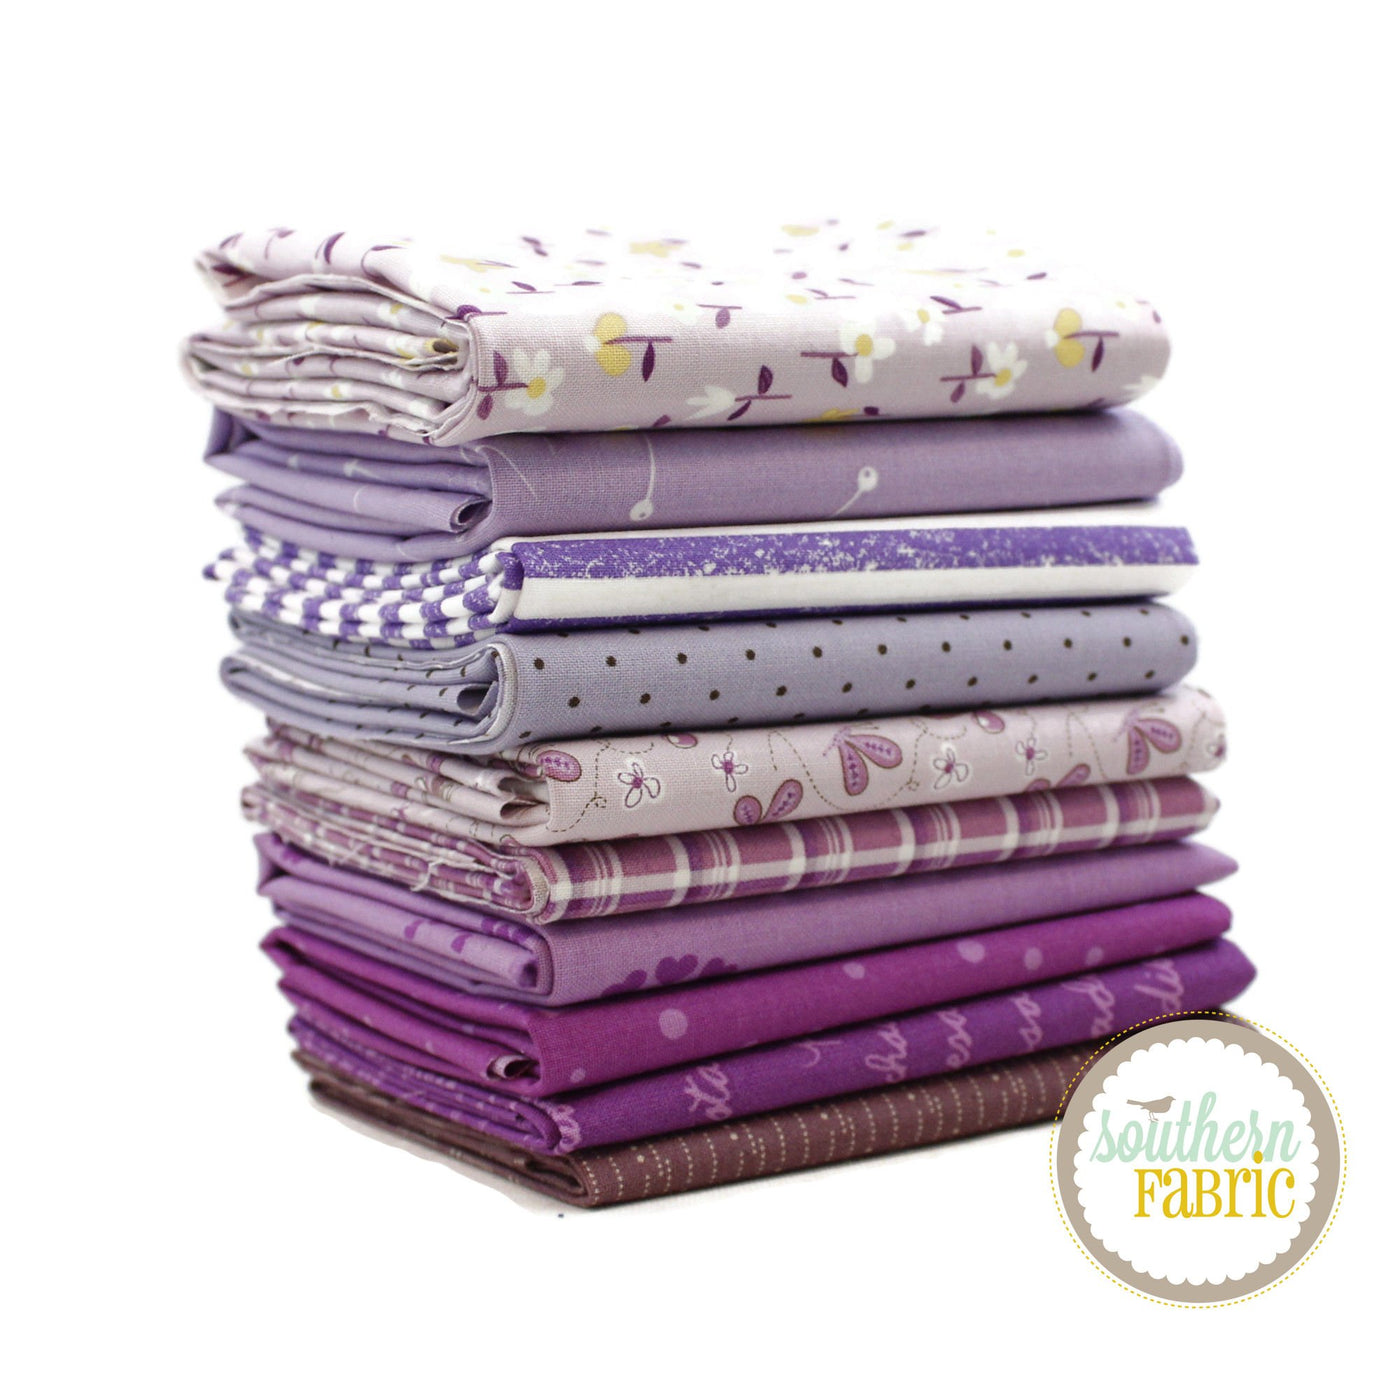 Violet and Purple Half Yard Bundle (10 pcs) by Mixed Designers for Southern Fabric